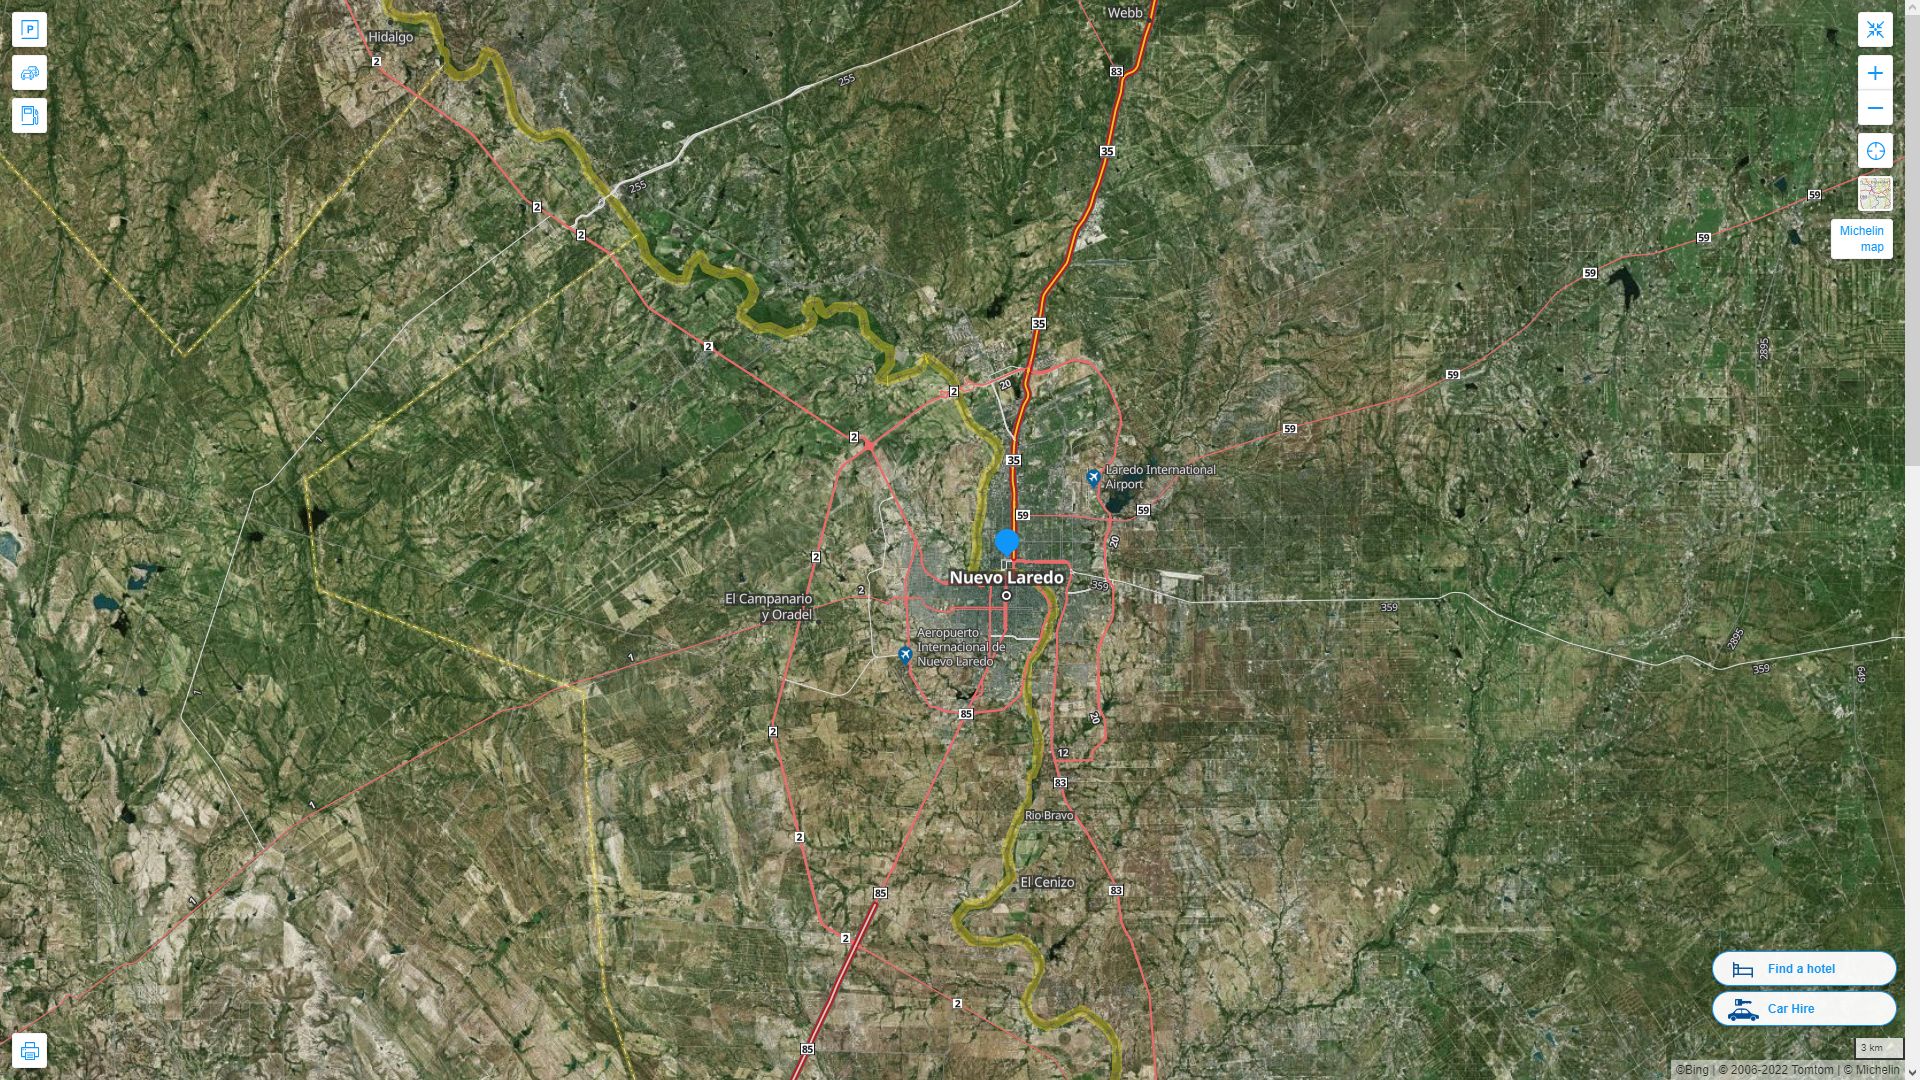 Laredo Texas Highway and Road Map with Satellite View